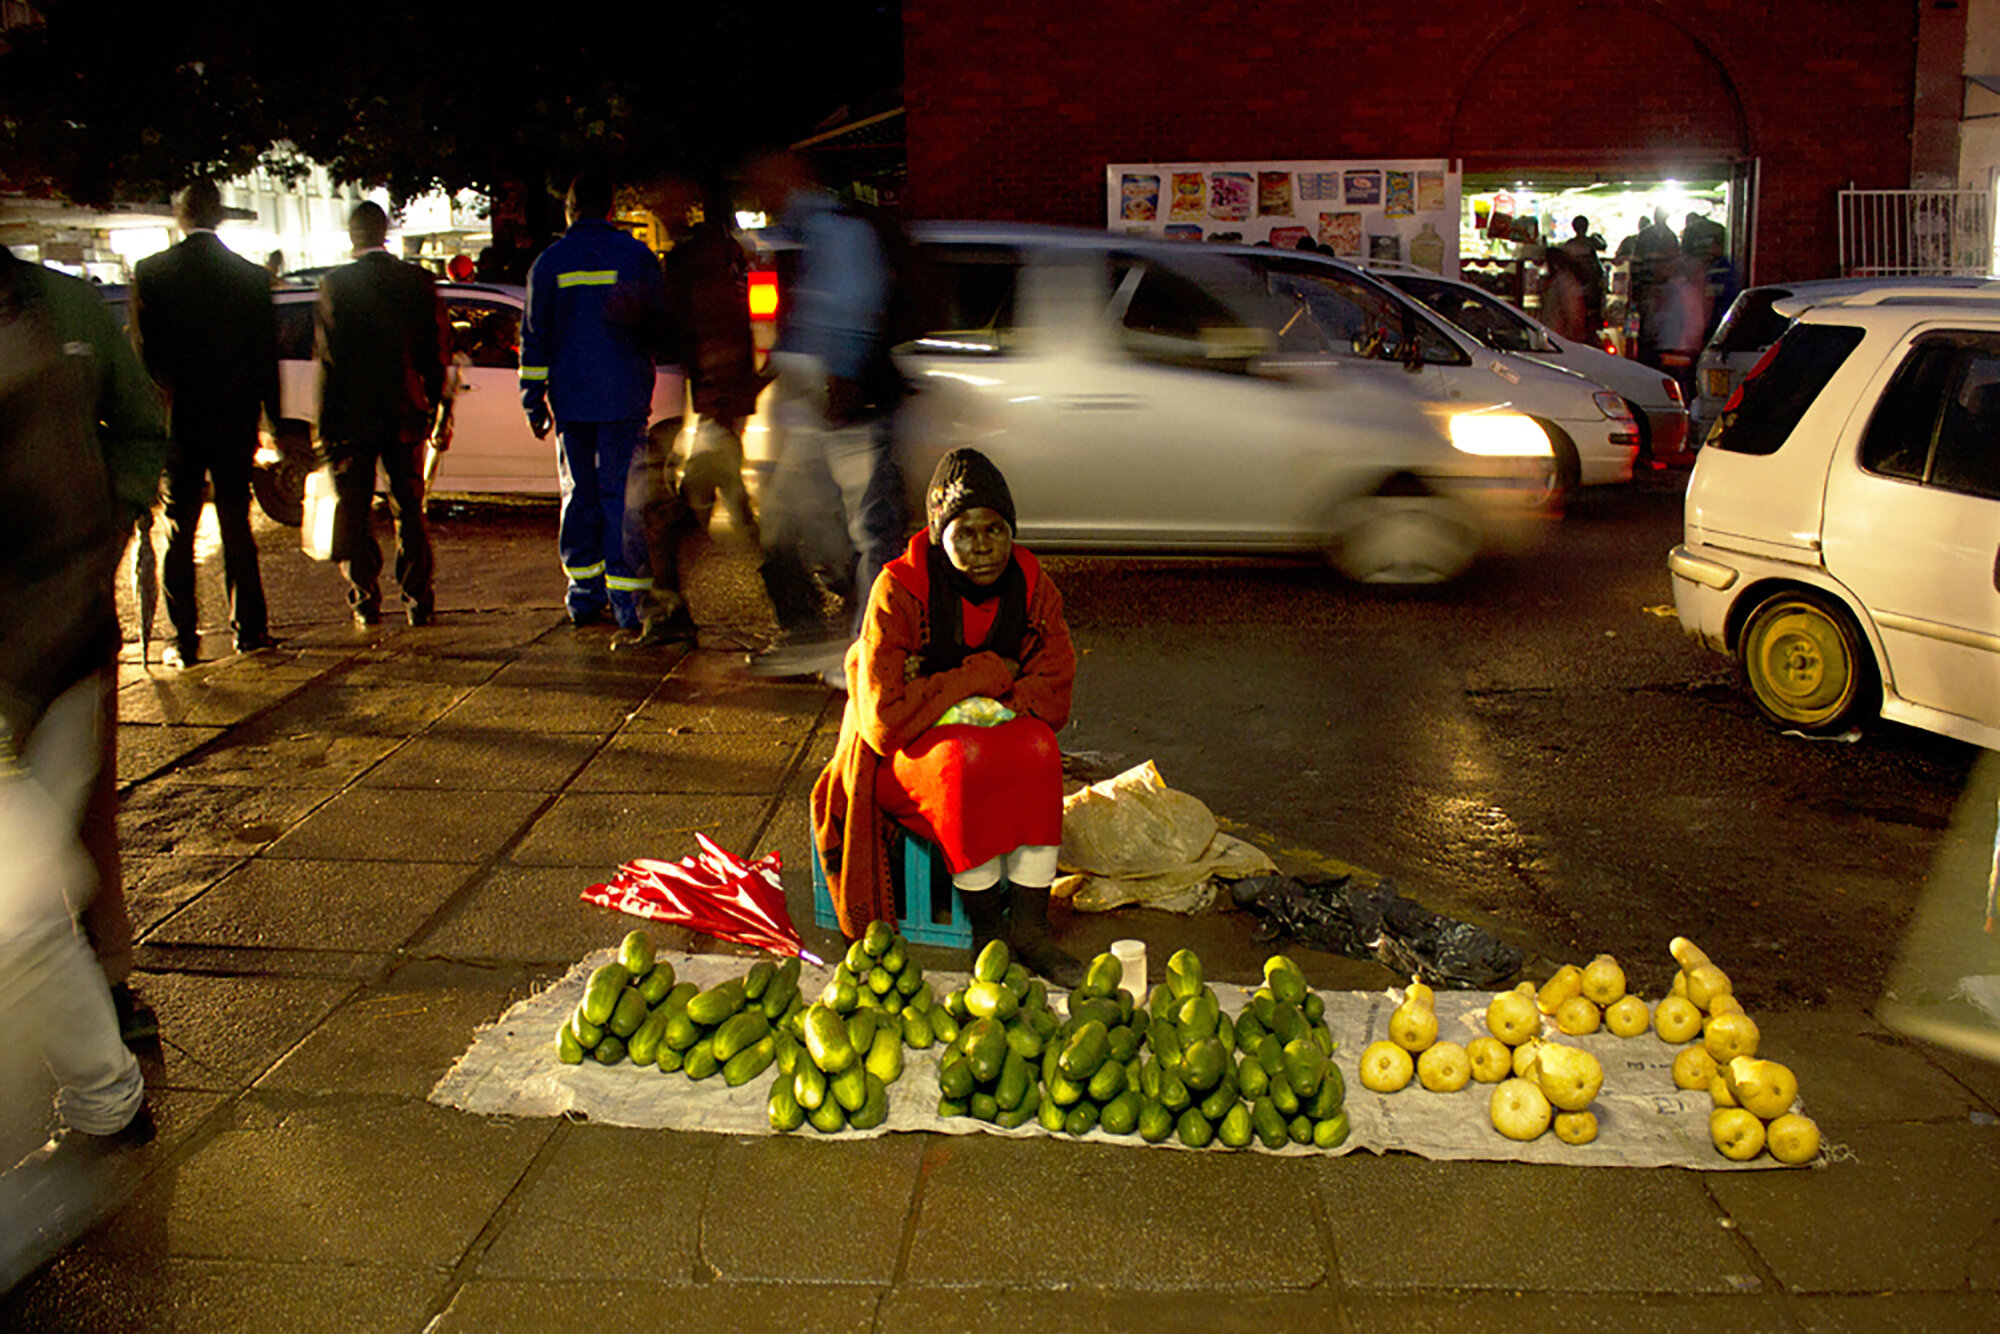  November 18, 2014: Duduzile Ncube waits for customers on a cold night in Harare. “I work my hardest for my children even when it is raining because I don’t want them to end up street kids or herd boys in the rural areas. They will end up blaming me,